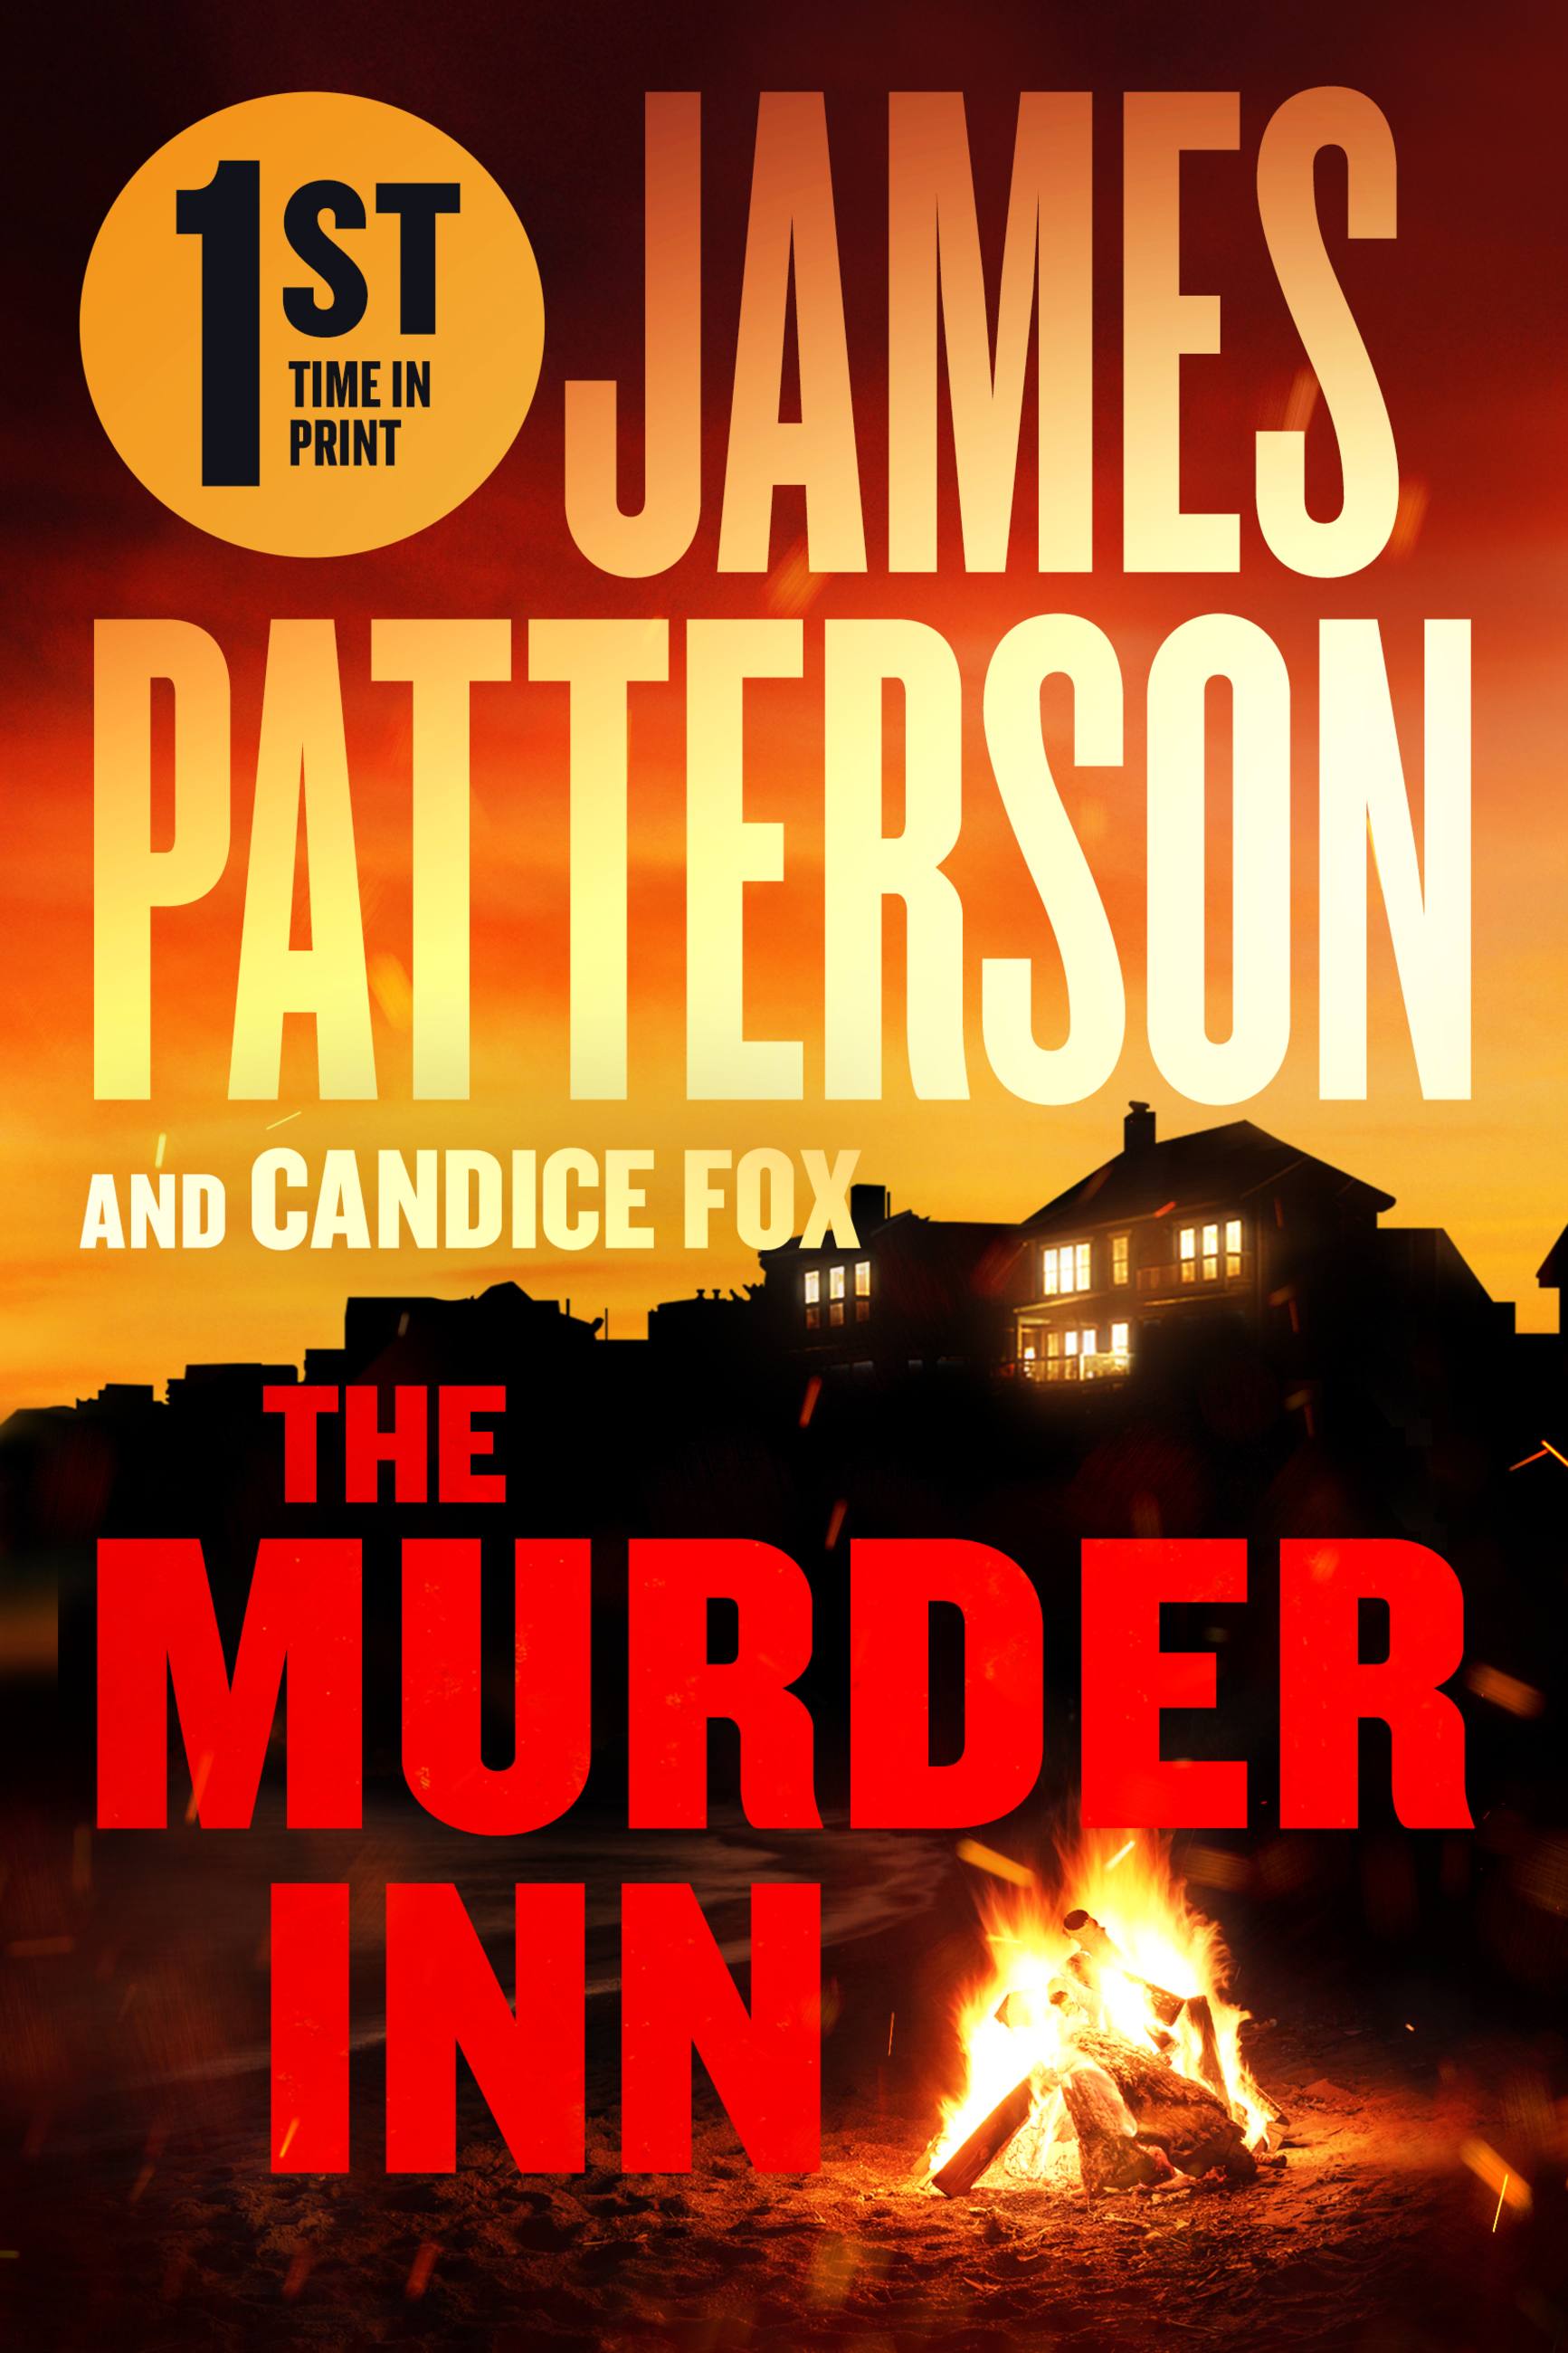 The Murder Inn by James Patterson and Candice Fox